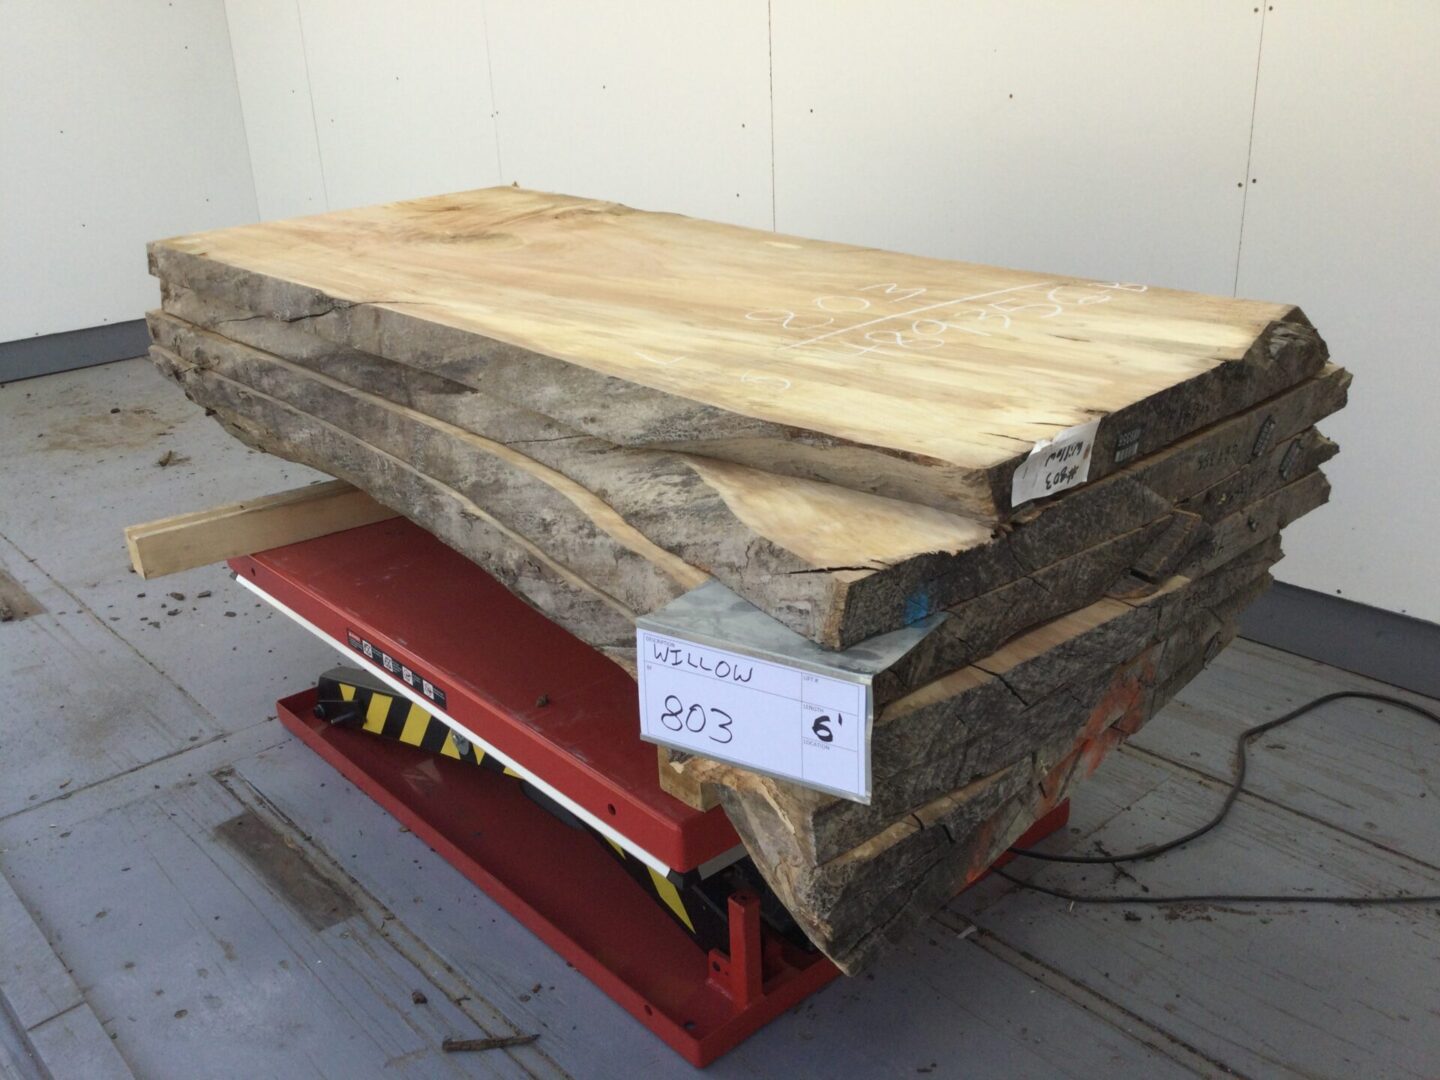 willow slabs 803 6in